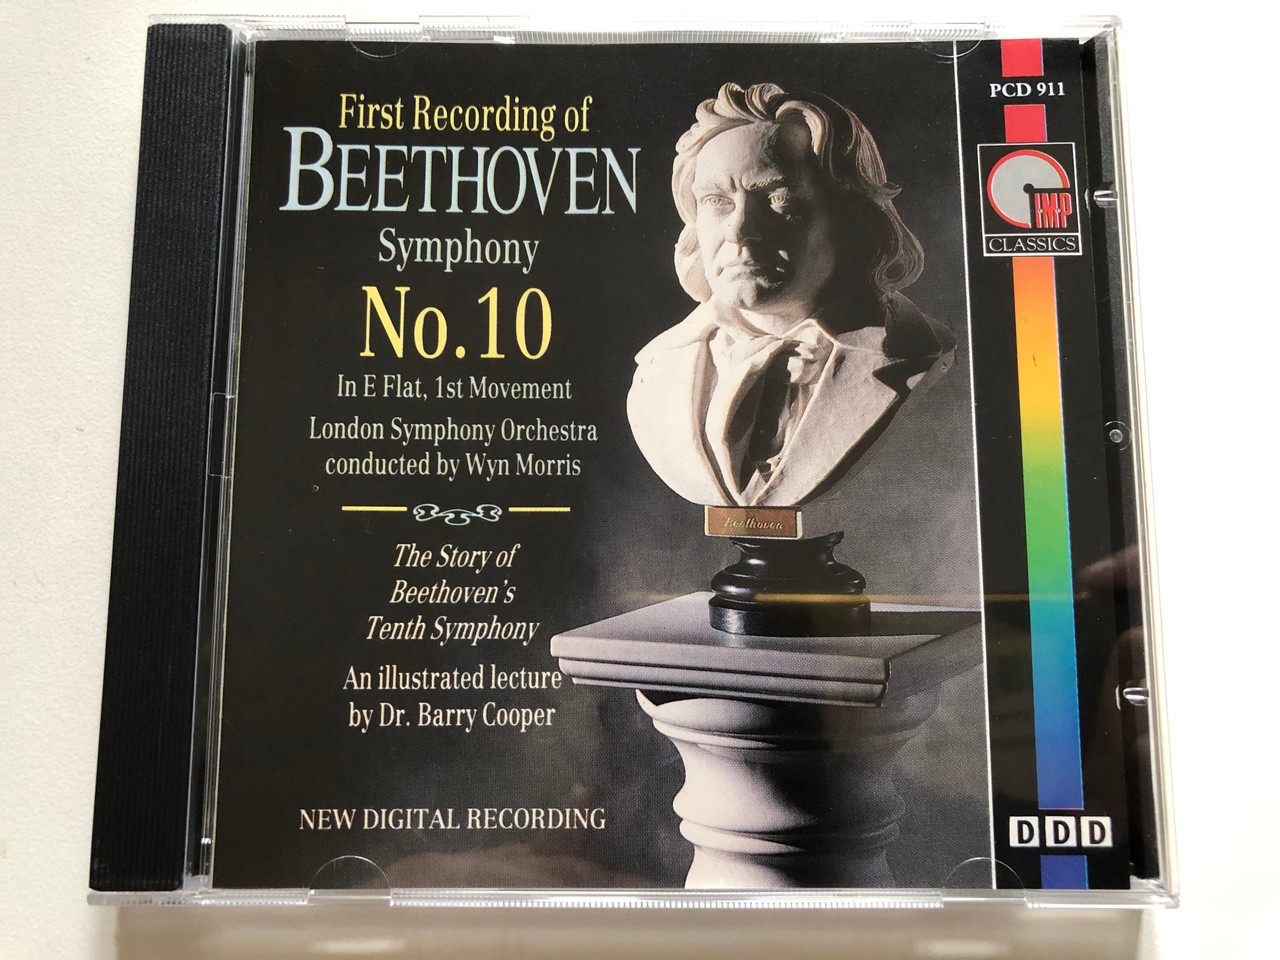 https://cdn10.bigcommerce.com/s-62bdpkt7pb/products/0/images/306644/First_Recording_Of_Beethoven_Symphony_No._10_In_E_Flat_1st_Movement_-_London_Symphony_Orchestra_Conducted_By_Wyn_Morris_The_Story_of_Beethovens_Tenth_Symphony._An_illustrated_lecture_by_Dr_1__78618.1698329378.1280.1280.JPG?c=2